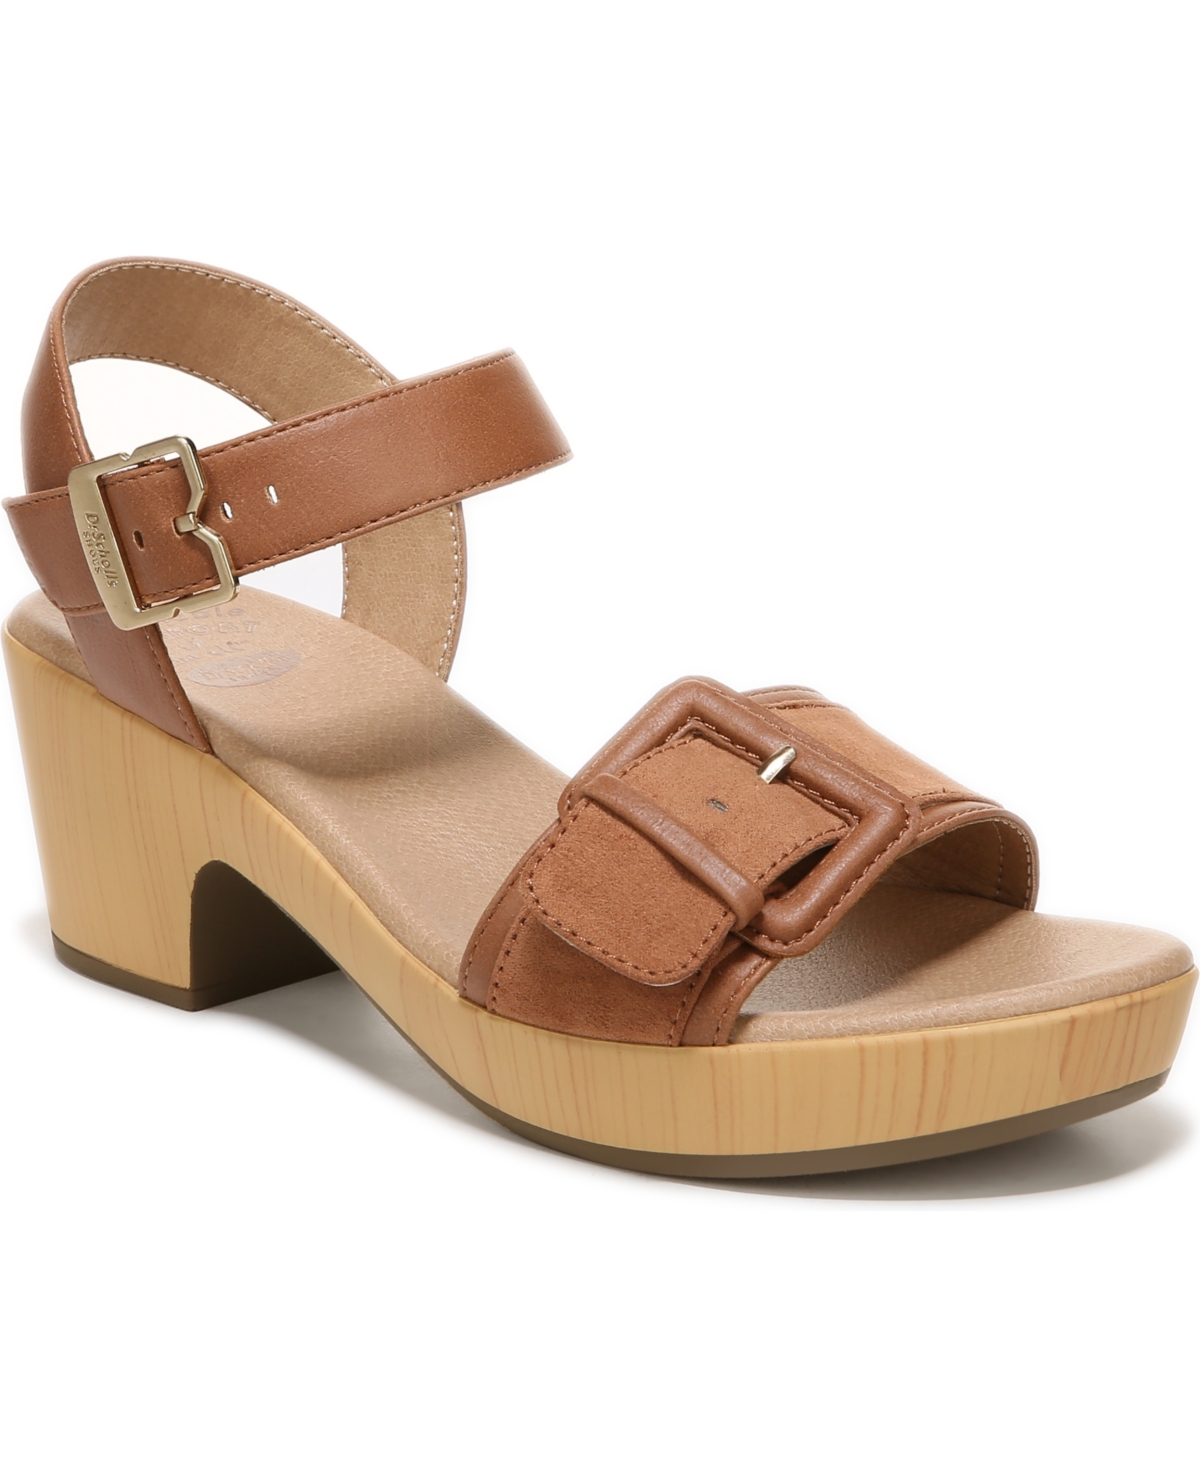 UPC 017116809267 product image for Dr. Scholl's Women's Felicity Too Ankle Strap Sandals Women's Shoes | upcitemdb.com